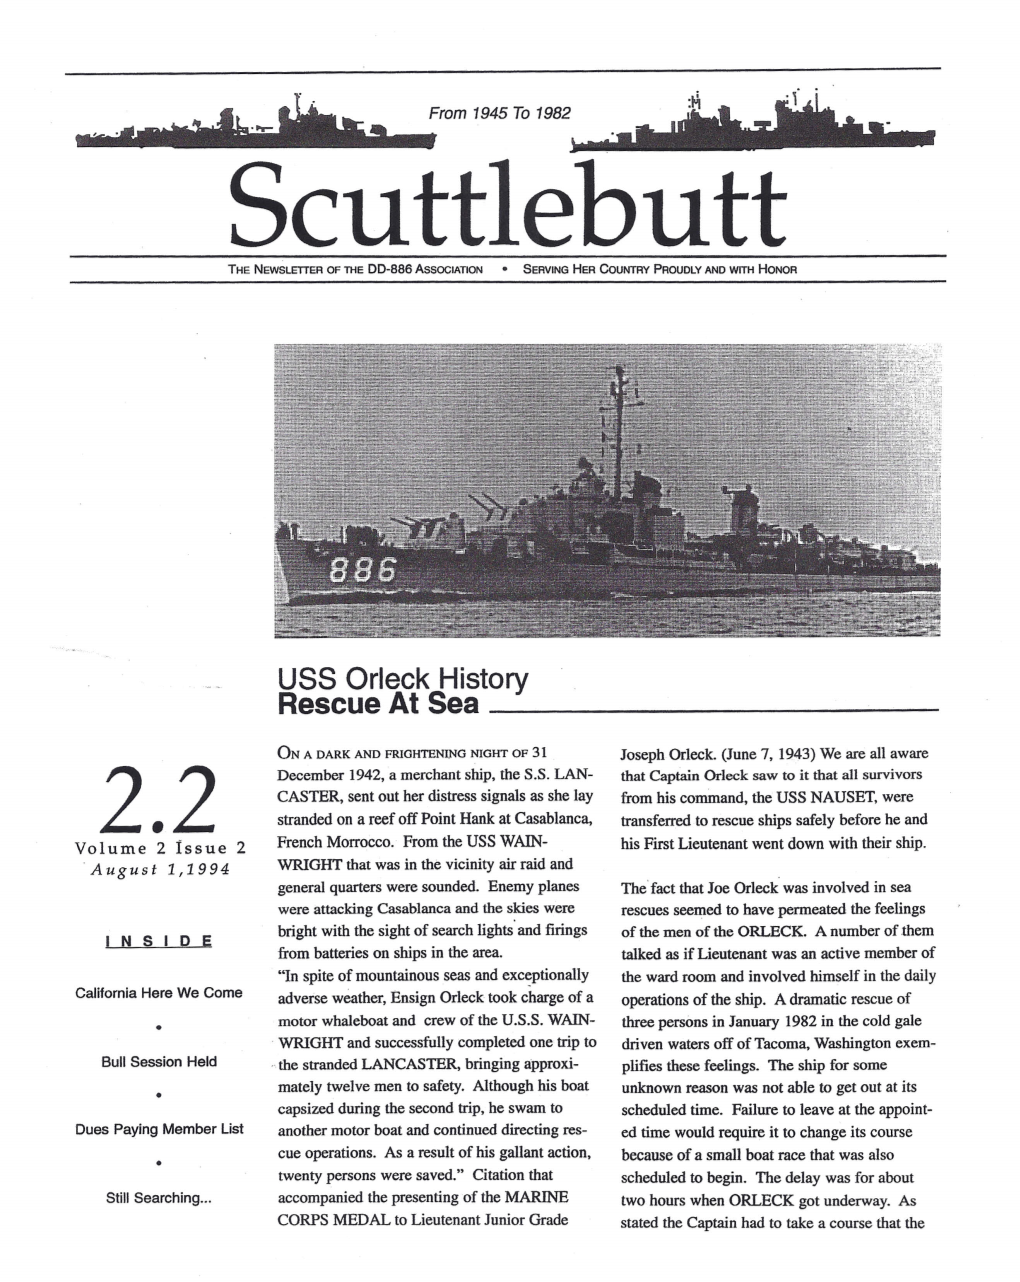 Scuttlebutt the NEWSLETTER of the 00-886 ASSOCIATION • SERVING HER Country PROUDLY and with HONOR